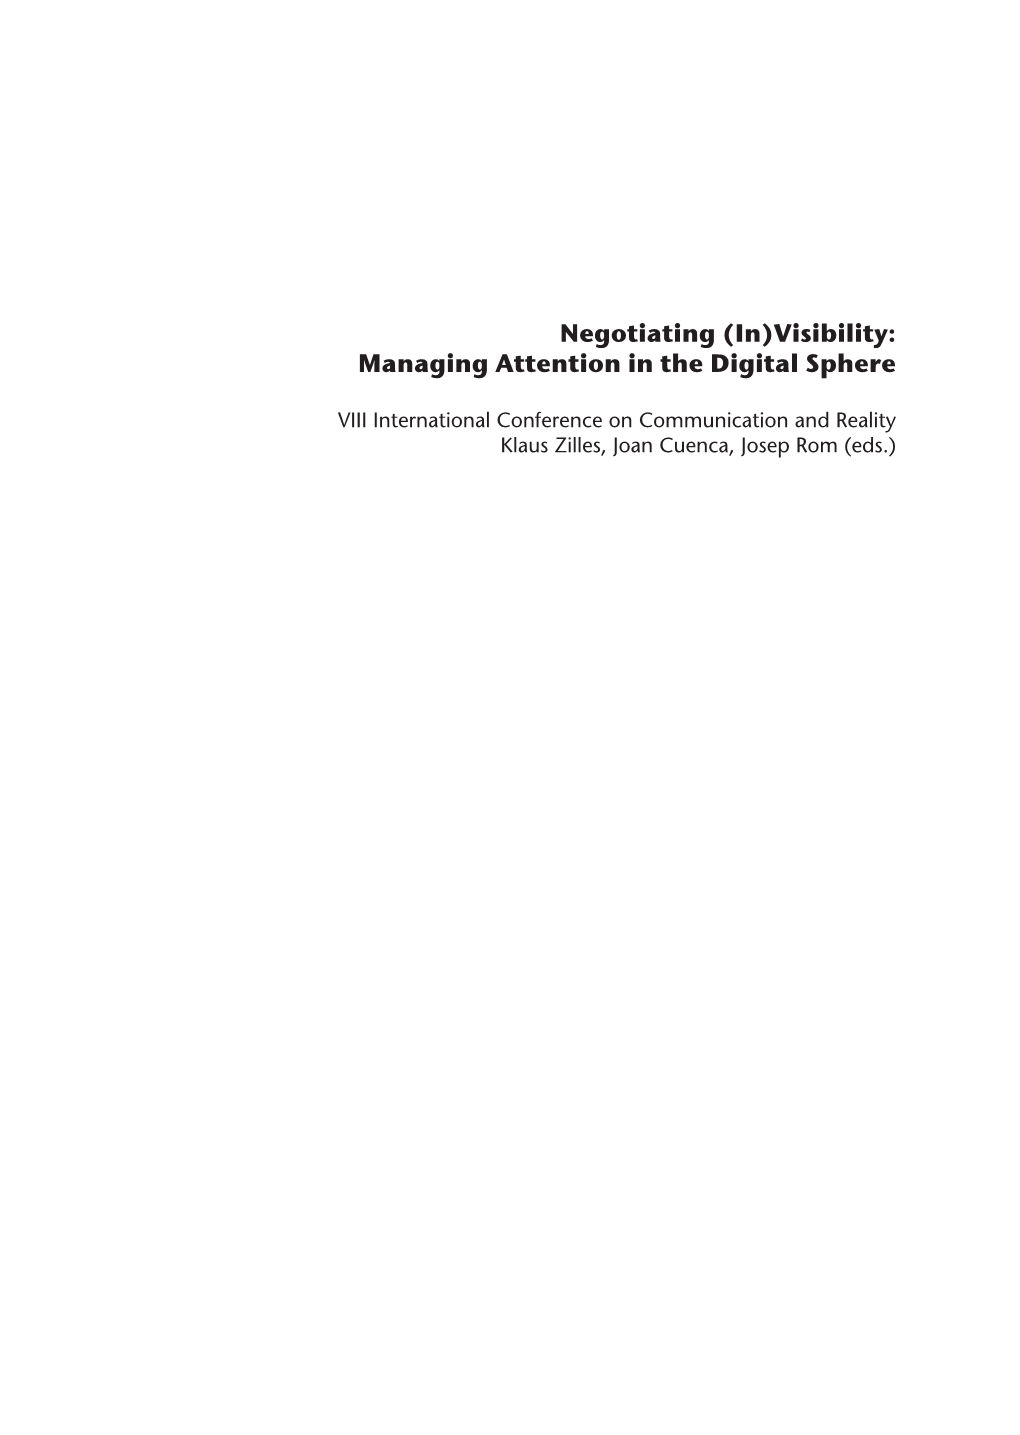 Negotiating (In)Visibility: Managing Attention in the Digital Sphere